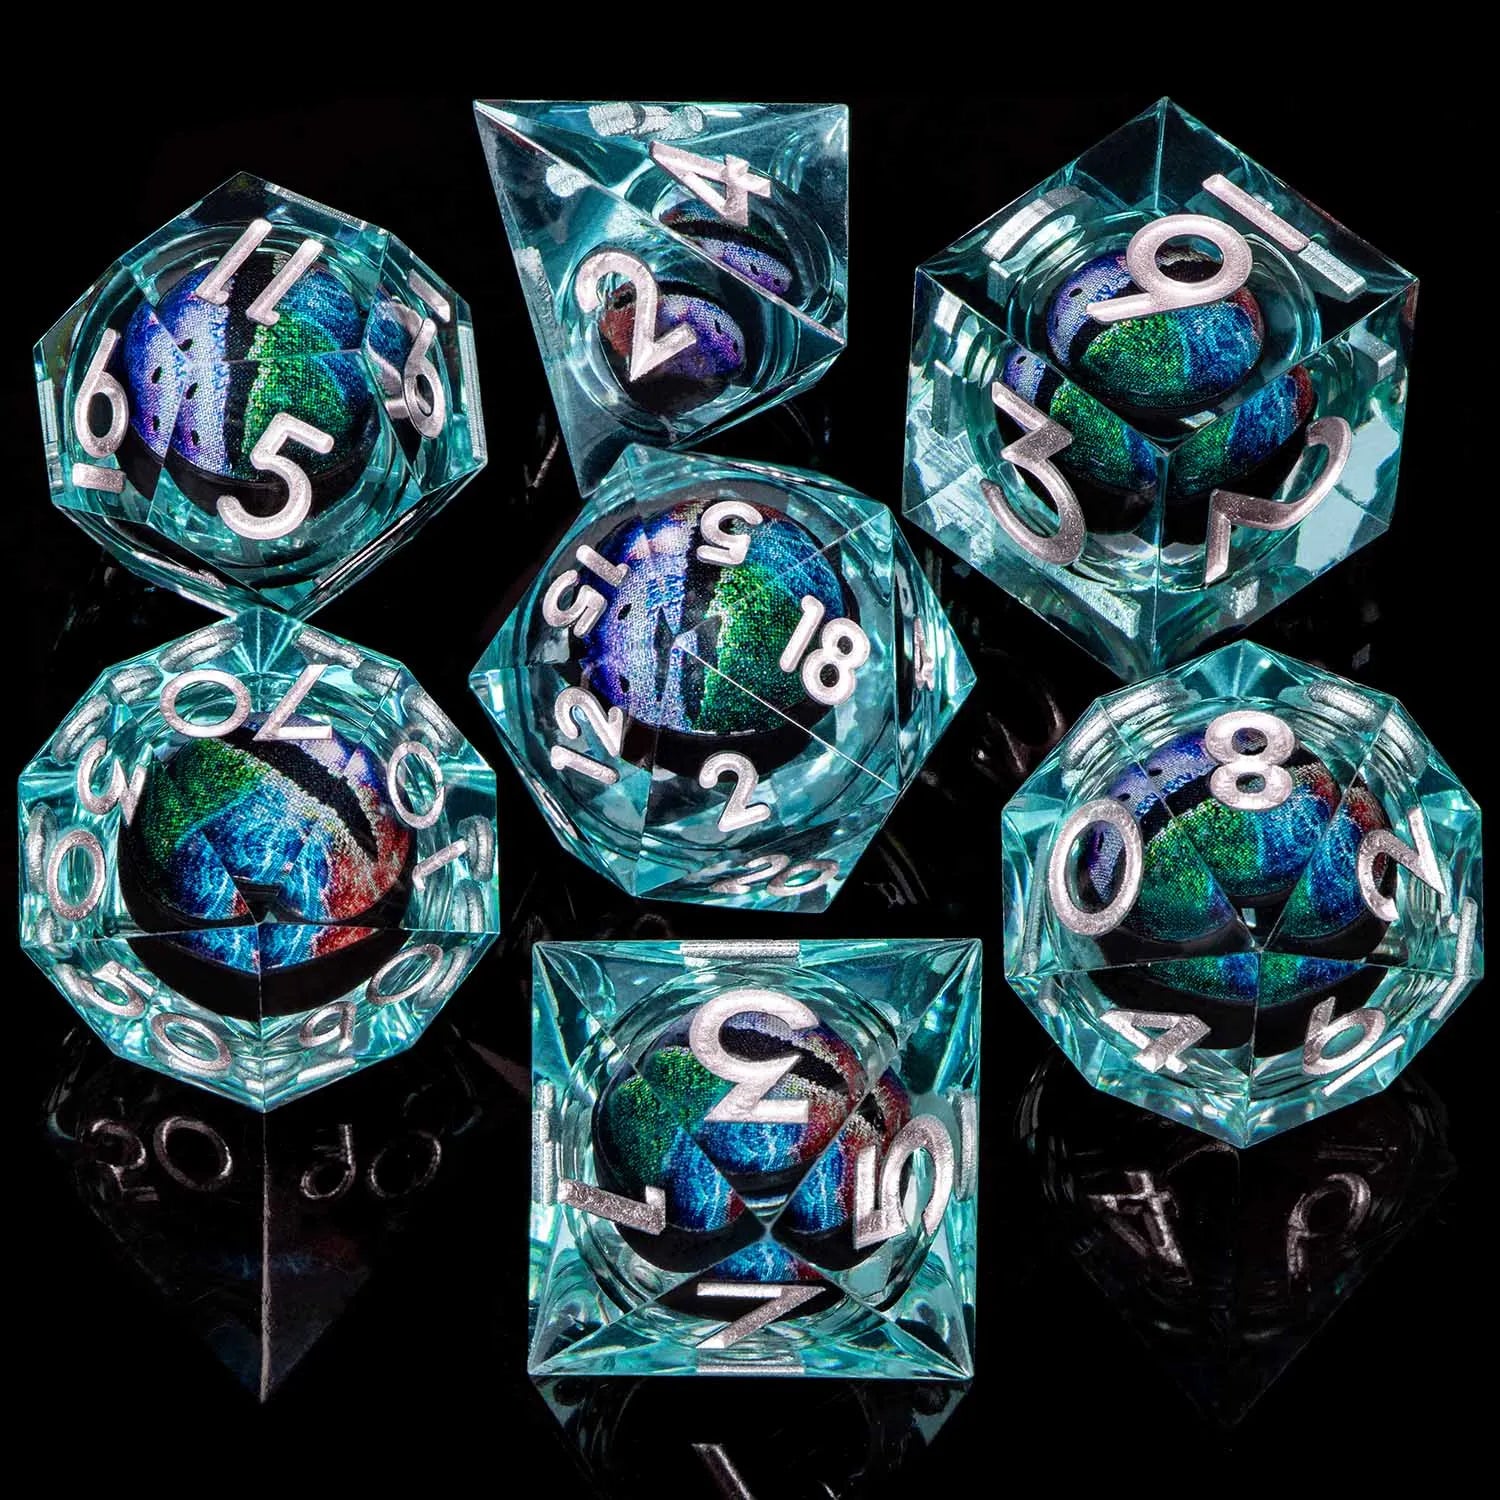 D and D Liquid Flow Core Eye Resin Dice Set | Dnd Dungeon and Dragon Pathfinder Role Playing Game Dice | D20 D&D Red Black Dice YY-09